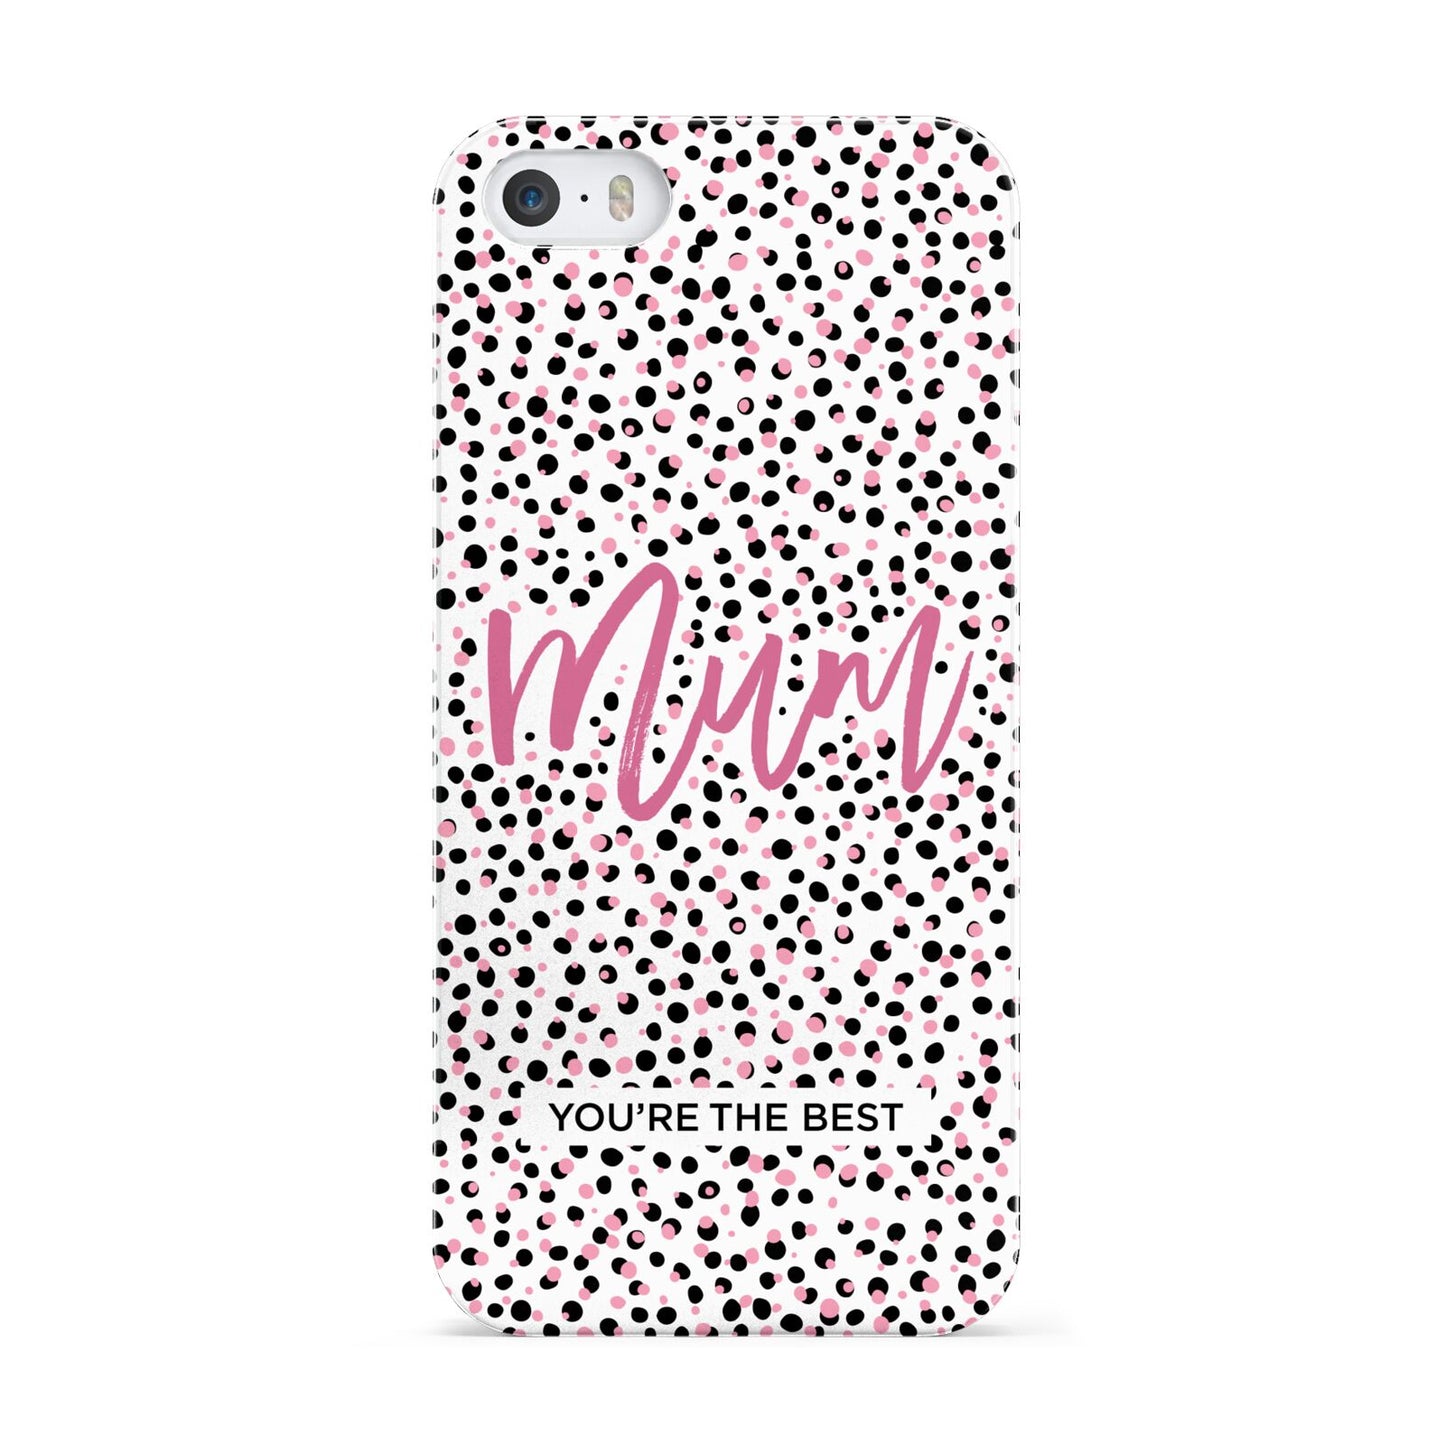 Mum Polka Dots Mothers Day Apple iPhone 5 Case